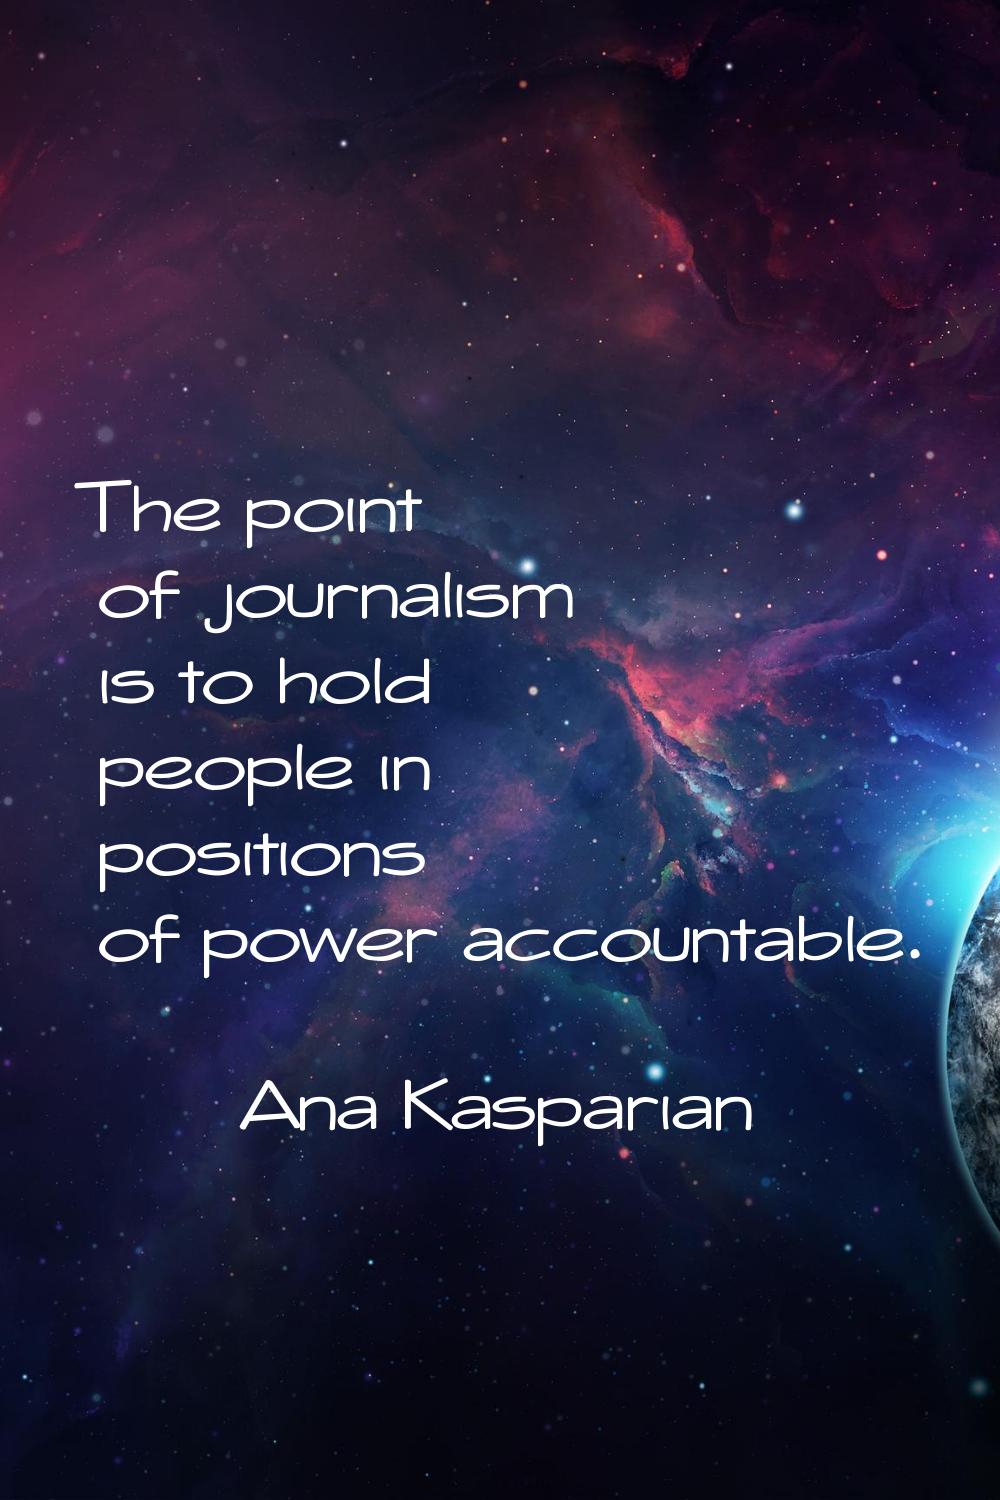 The point of journalism is to hold people in positions of power accountable.